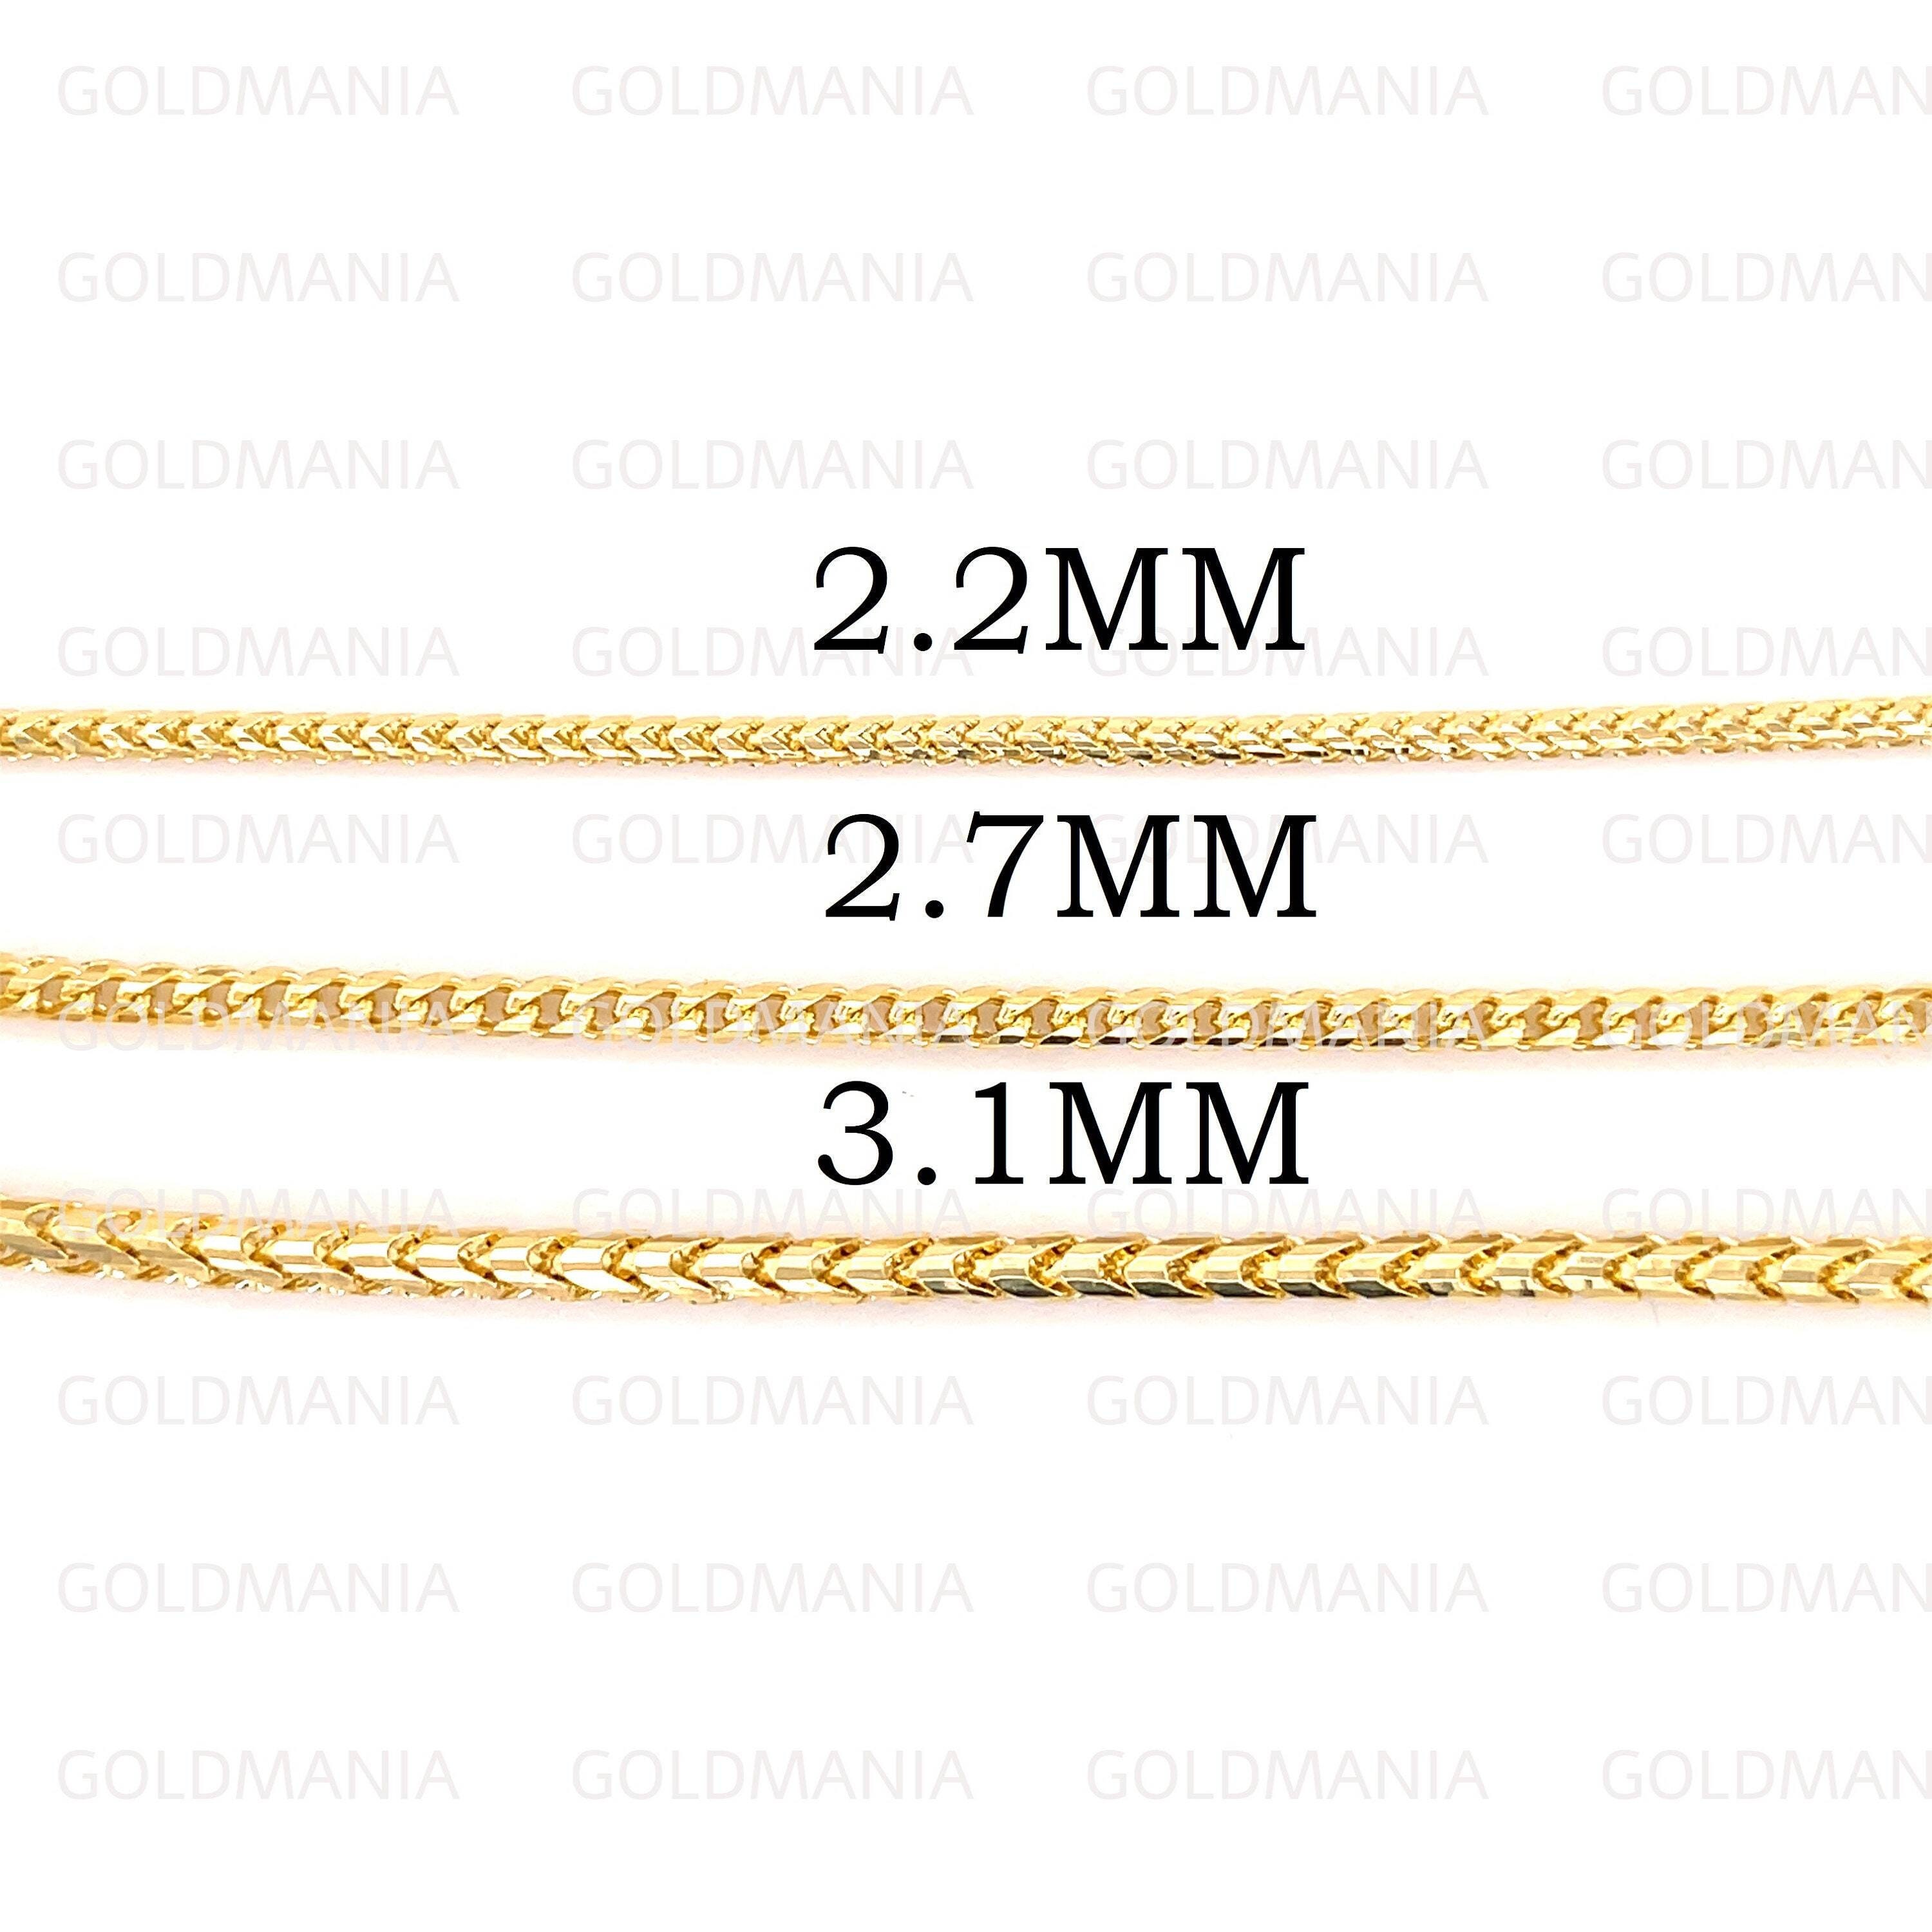 Buy 10k Solid Yellow Gold Small Tight Link Franco Chain 20-26 Inch